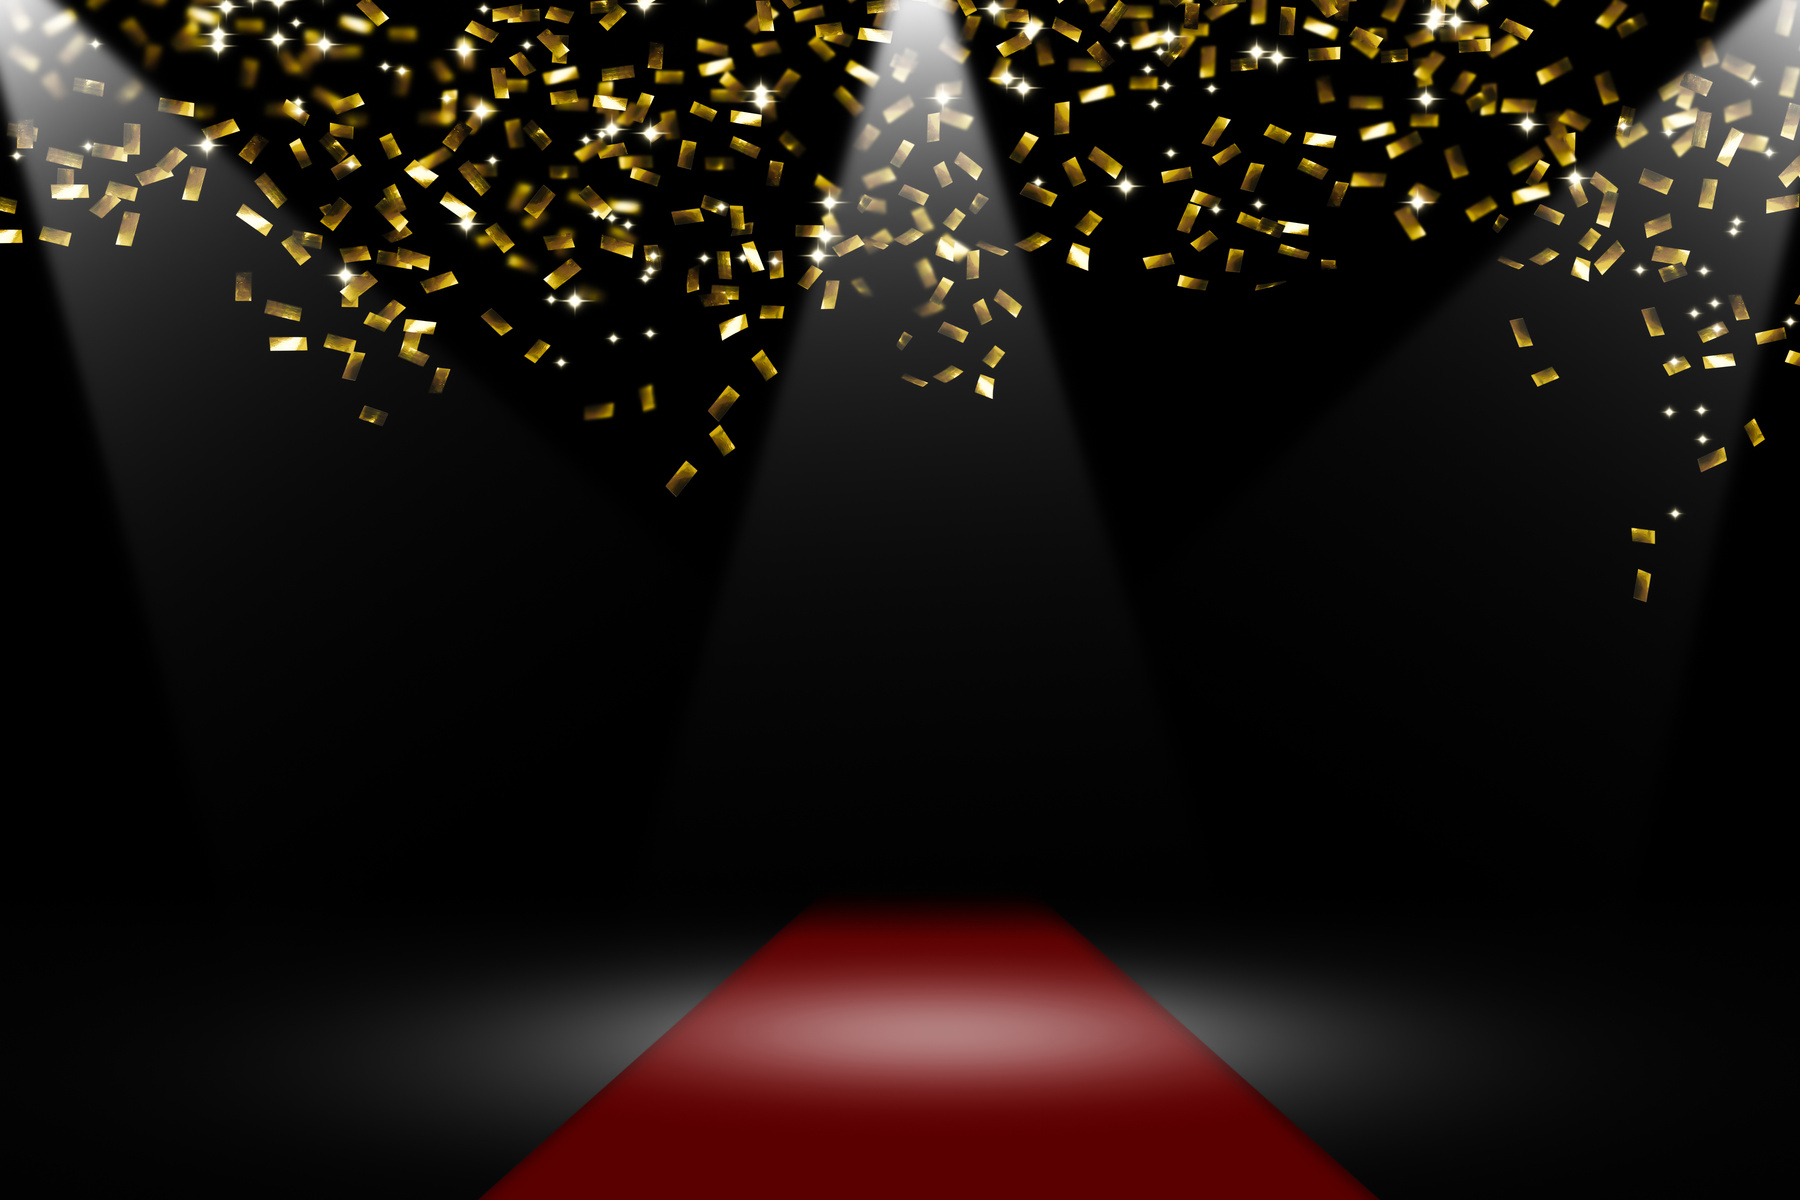 a red carpet with gold confetti falling from the ceiling